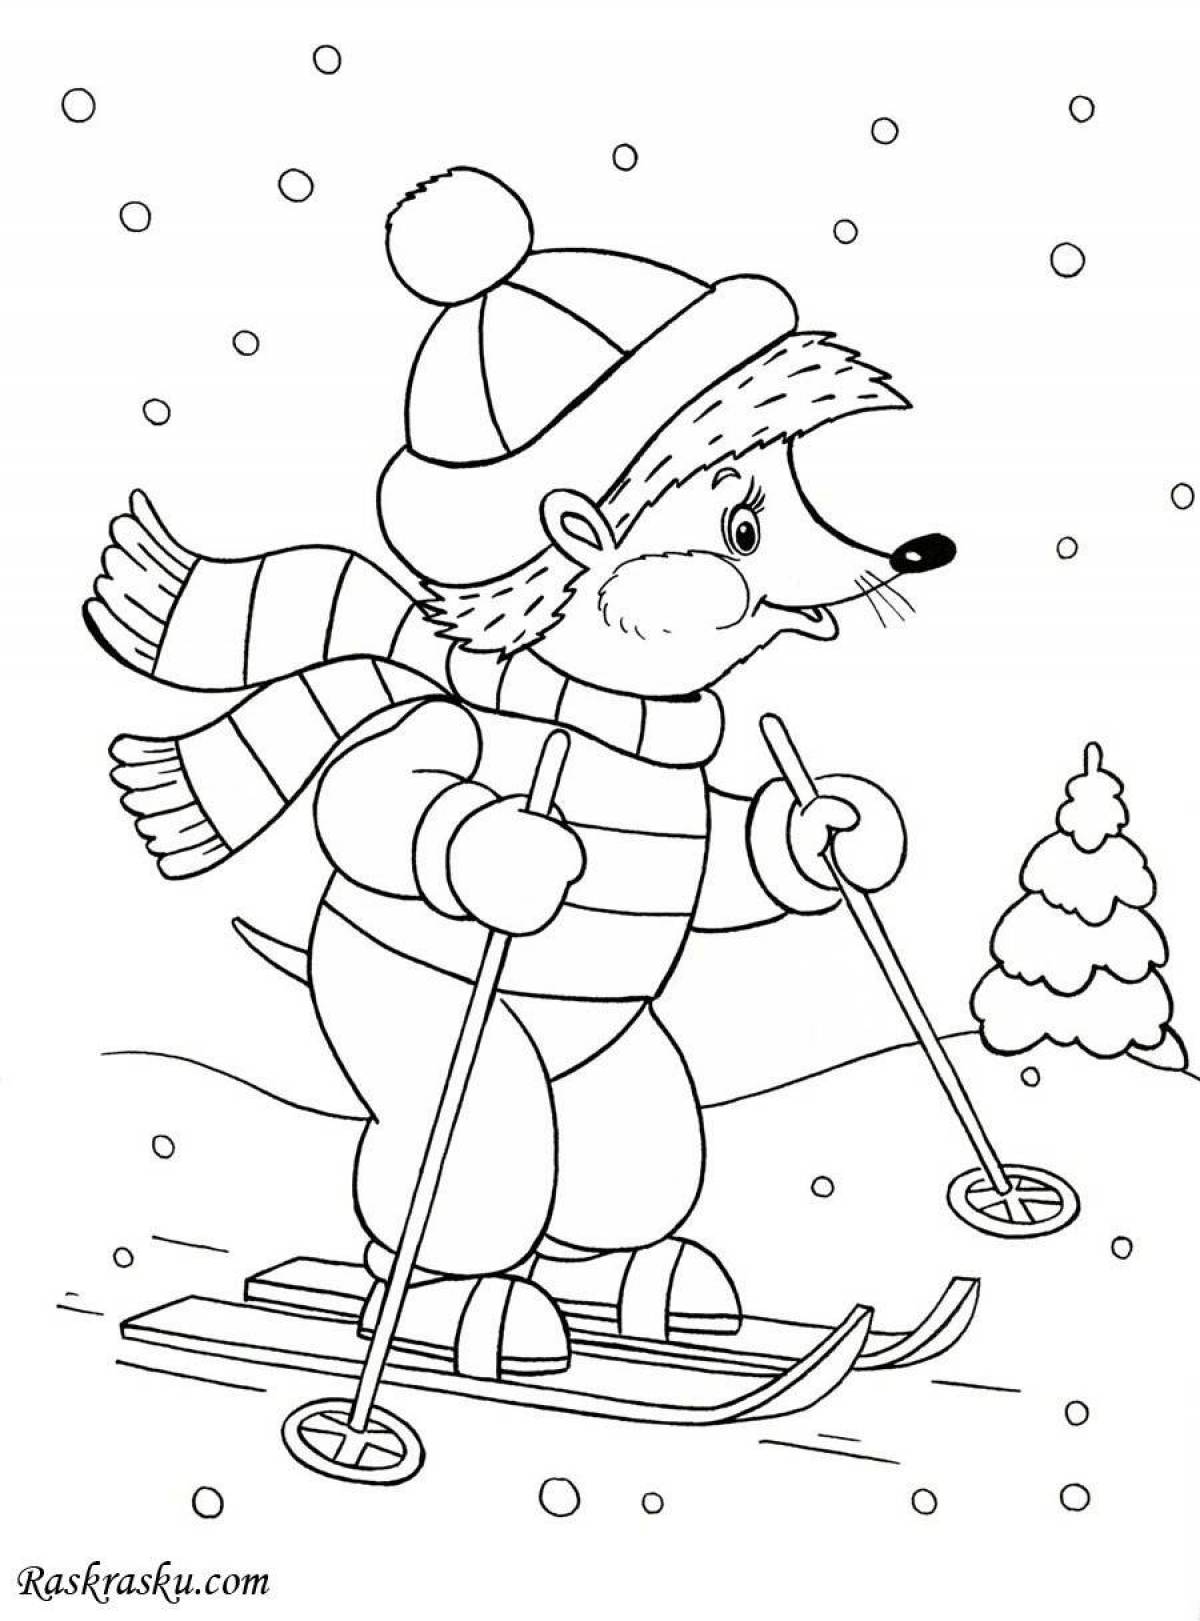 Inspirational winter coloring book for kids 6-7 years old